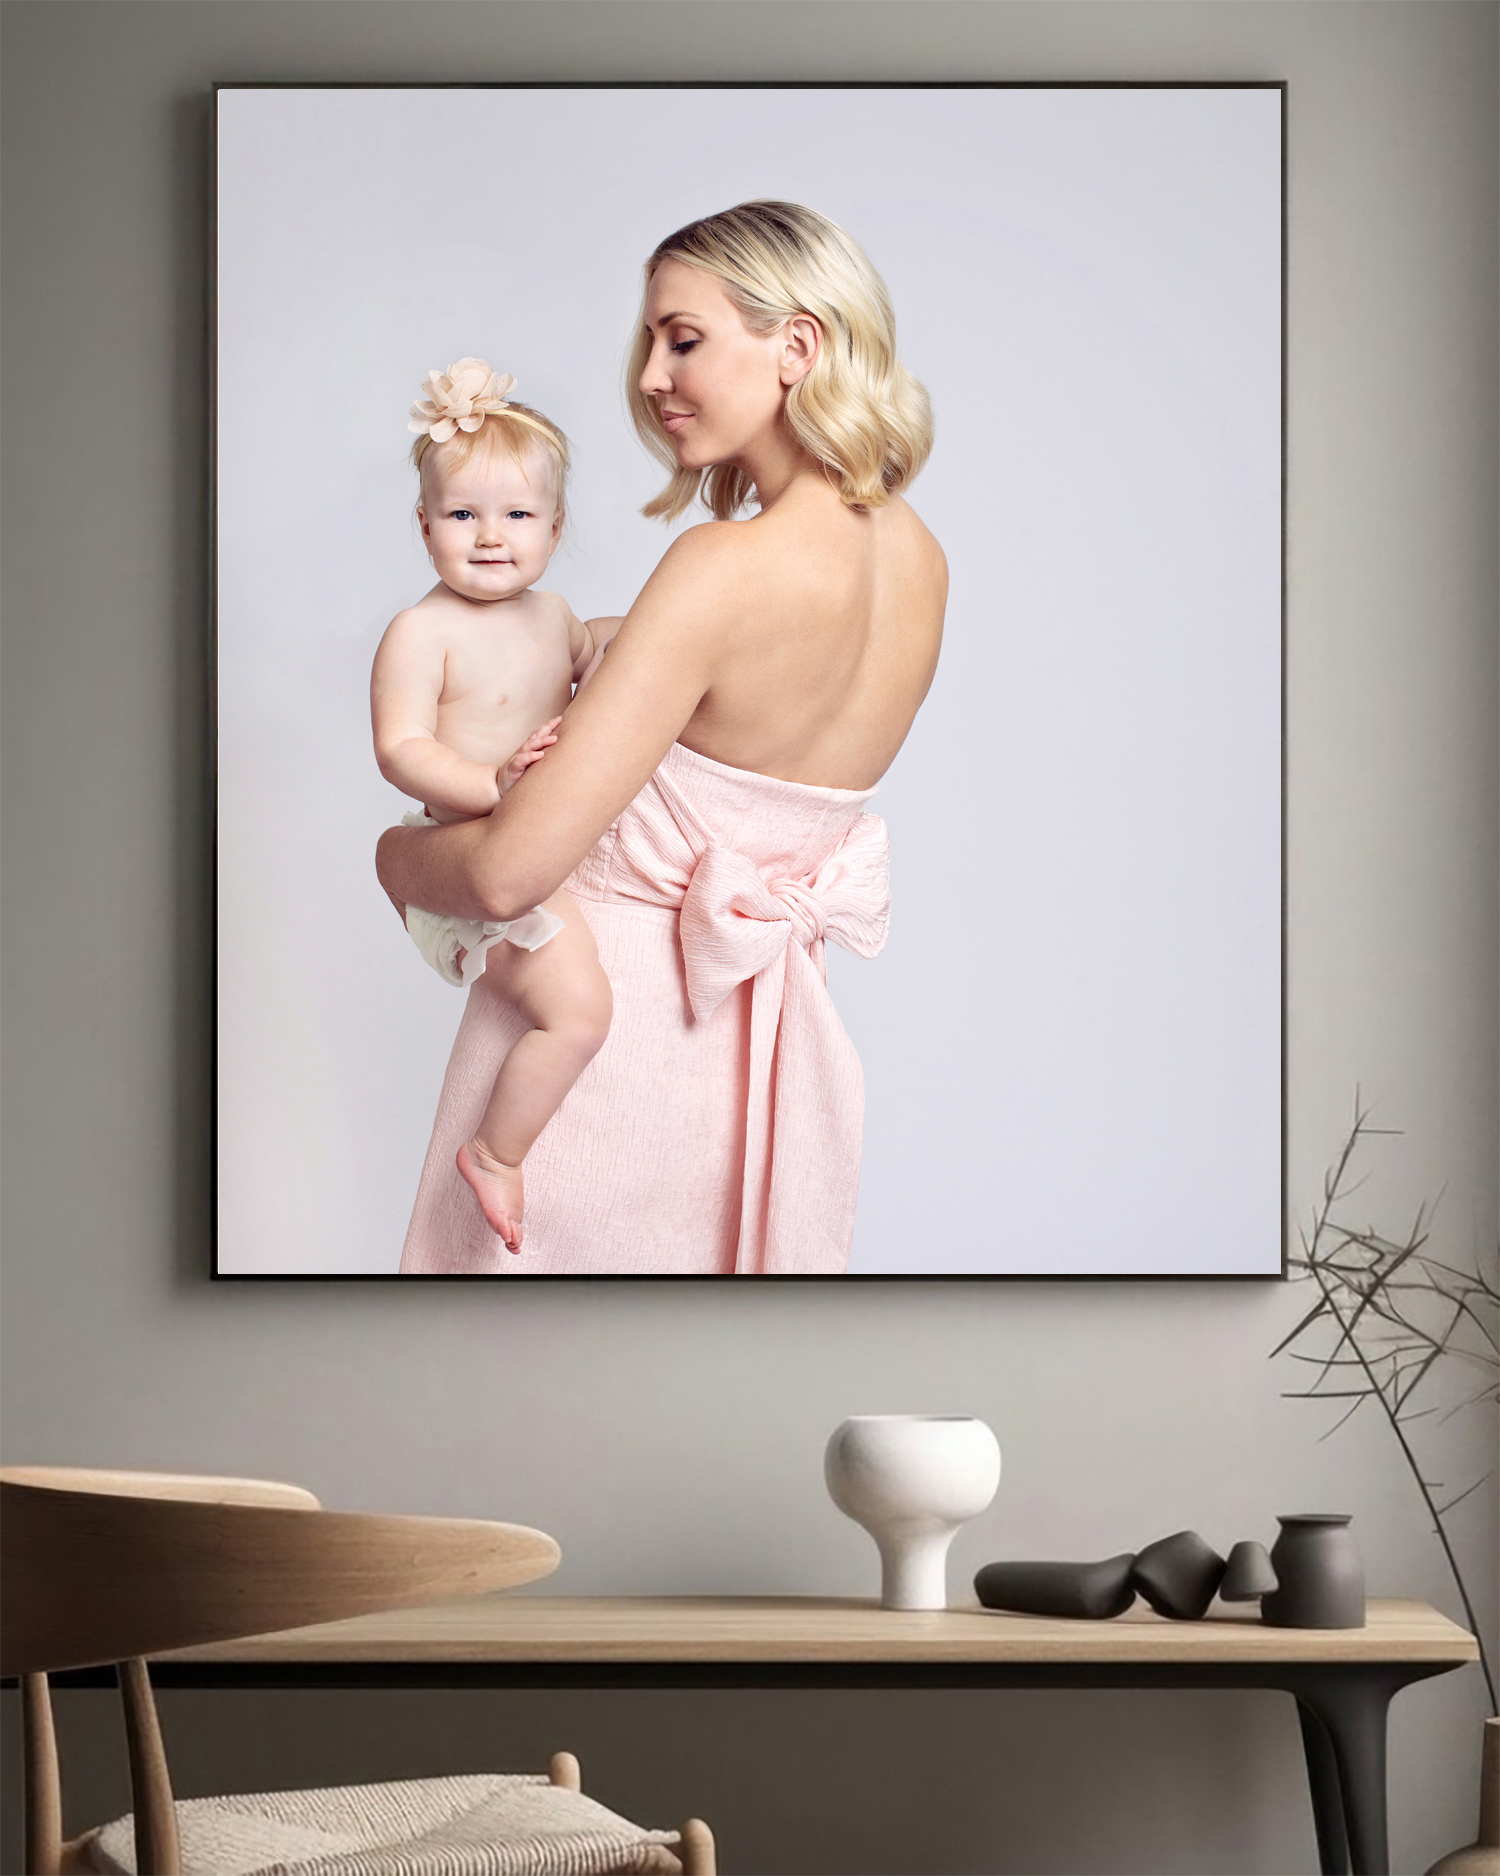 A framed photo of mom and baby in a relaxed and stylish photoshoot.